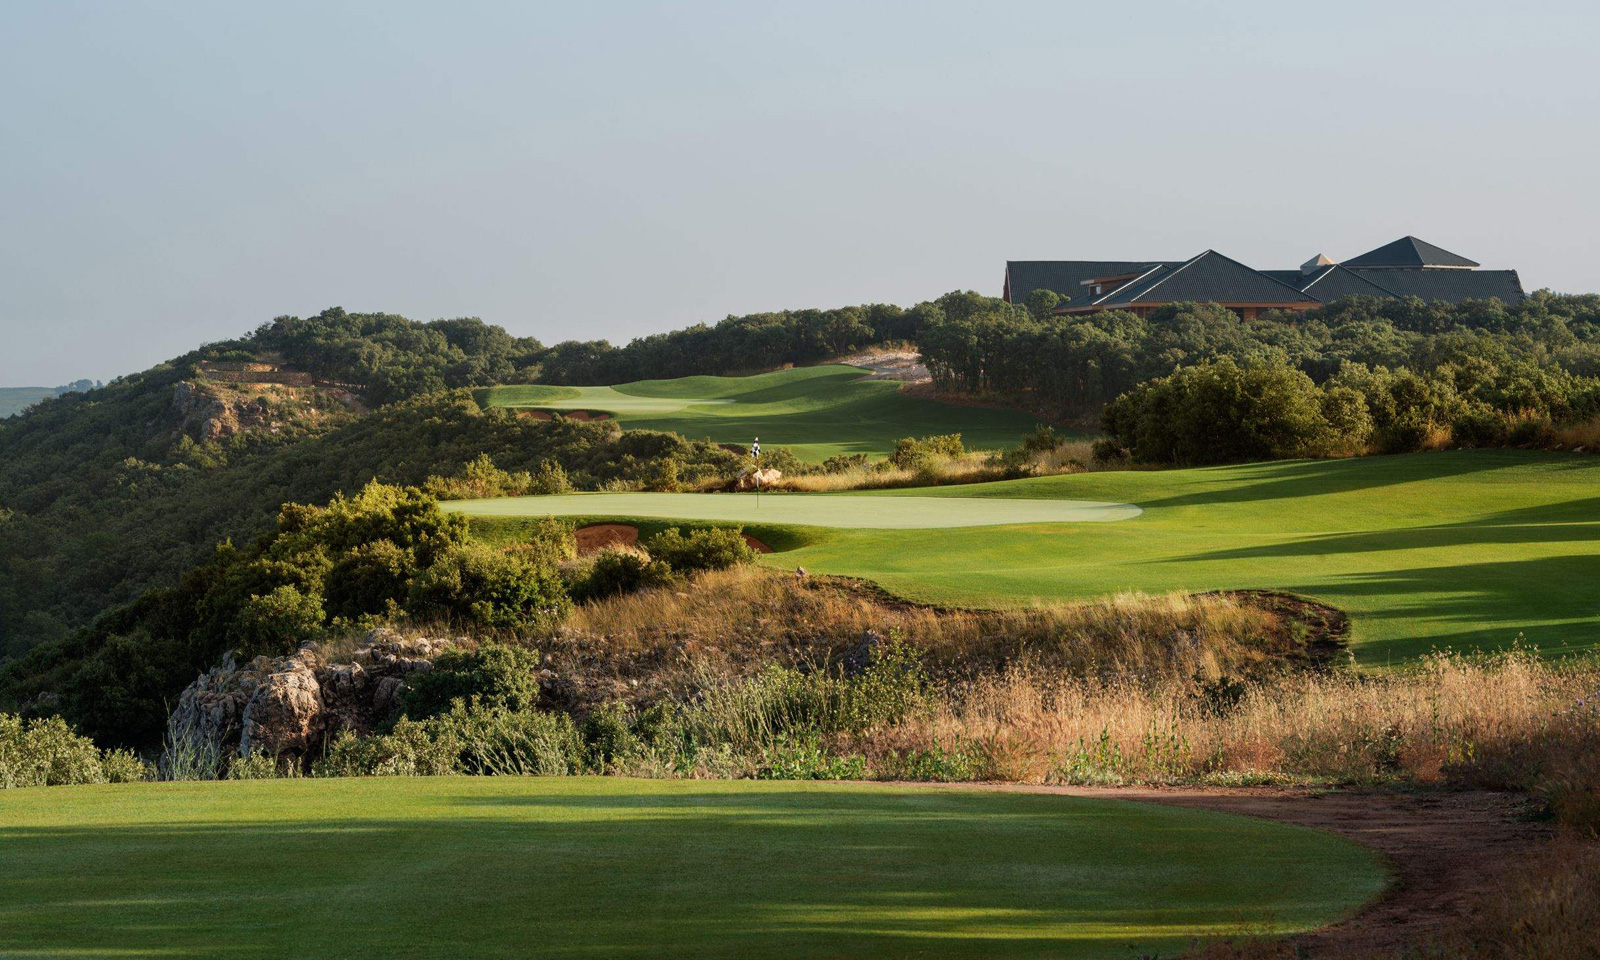 Jack Nicklaus Signature Golf Course opens in Morocco